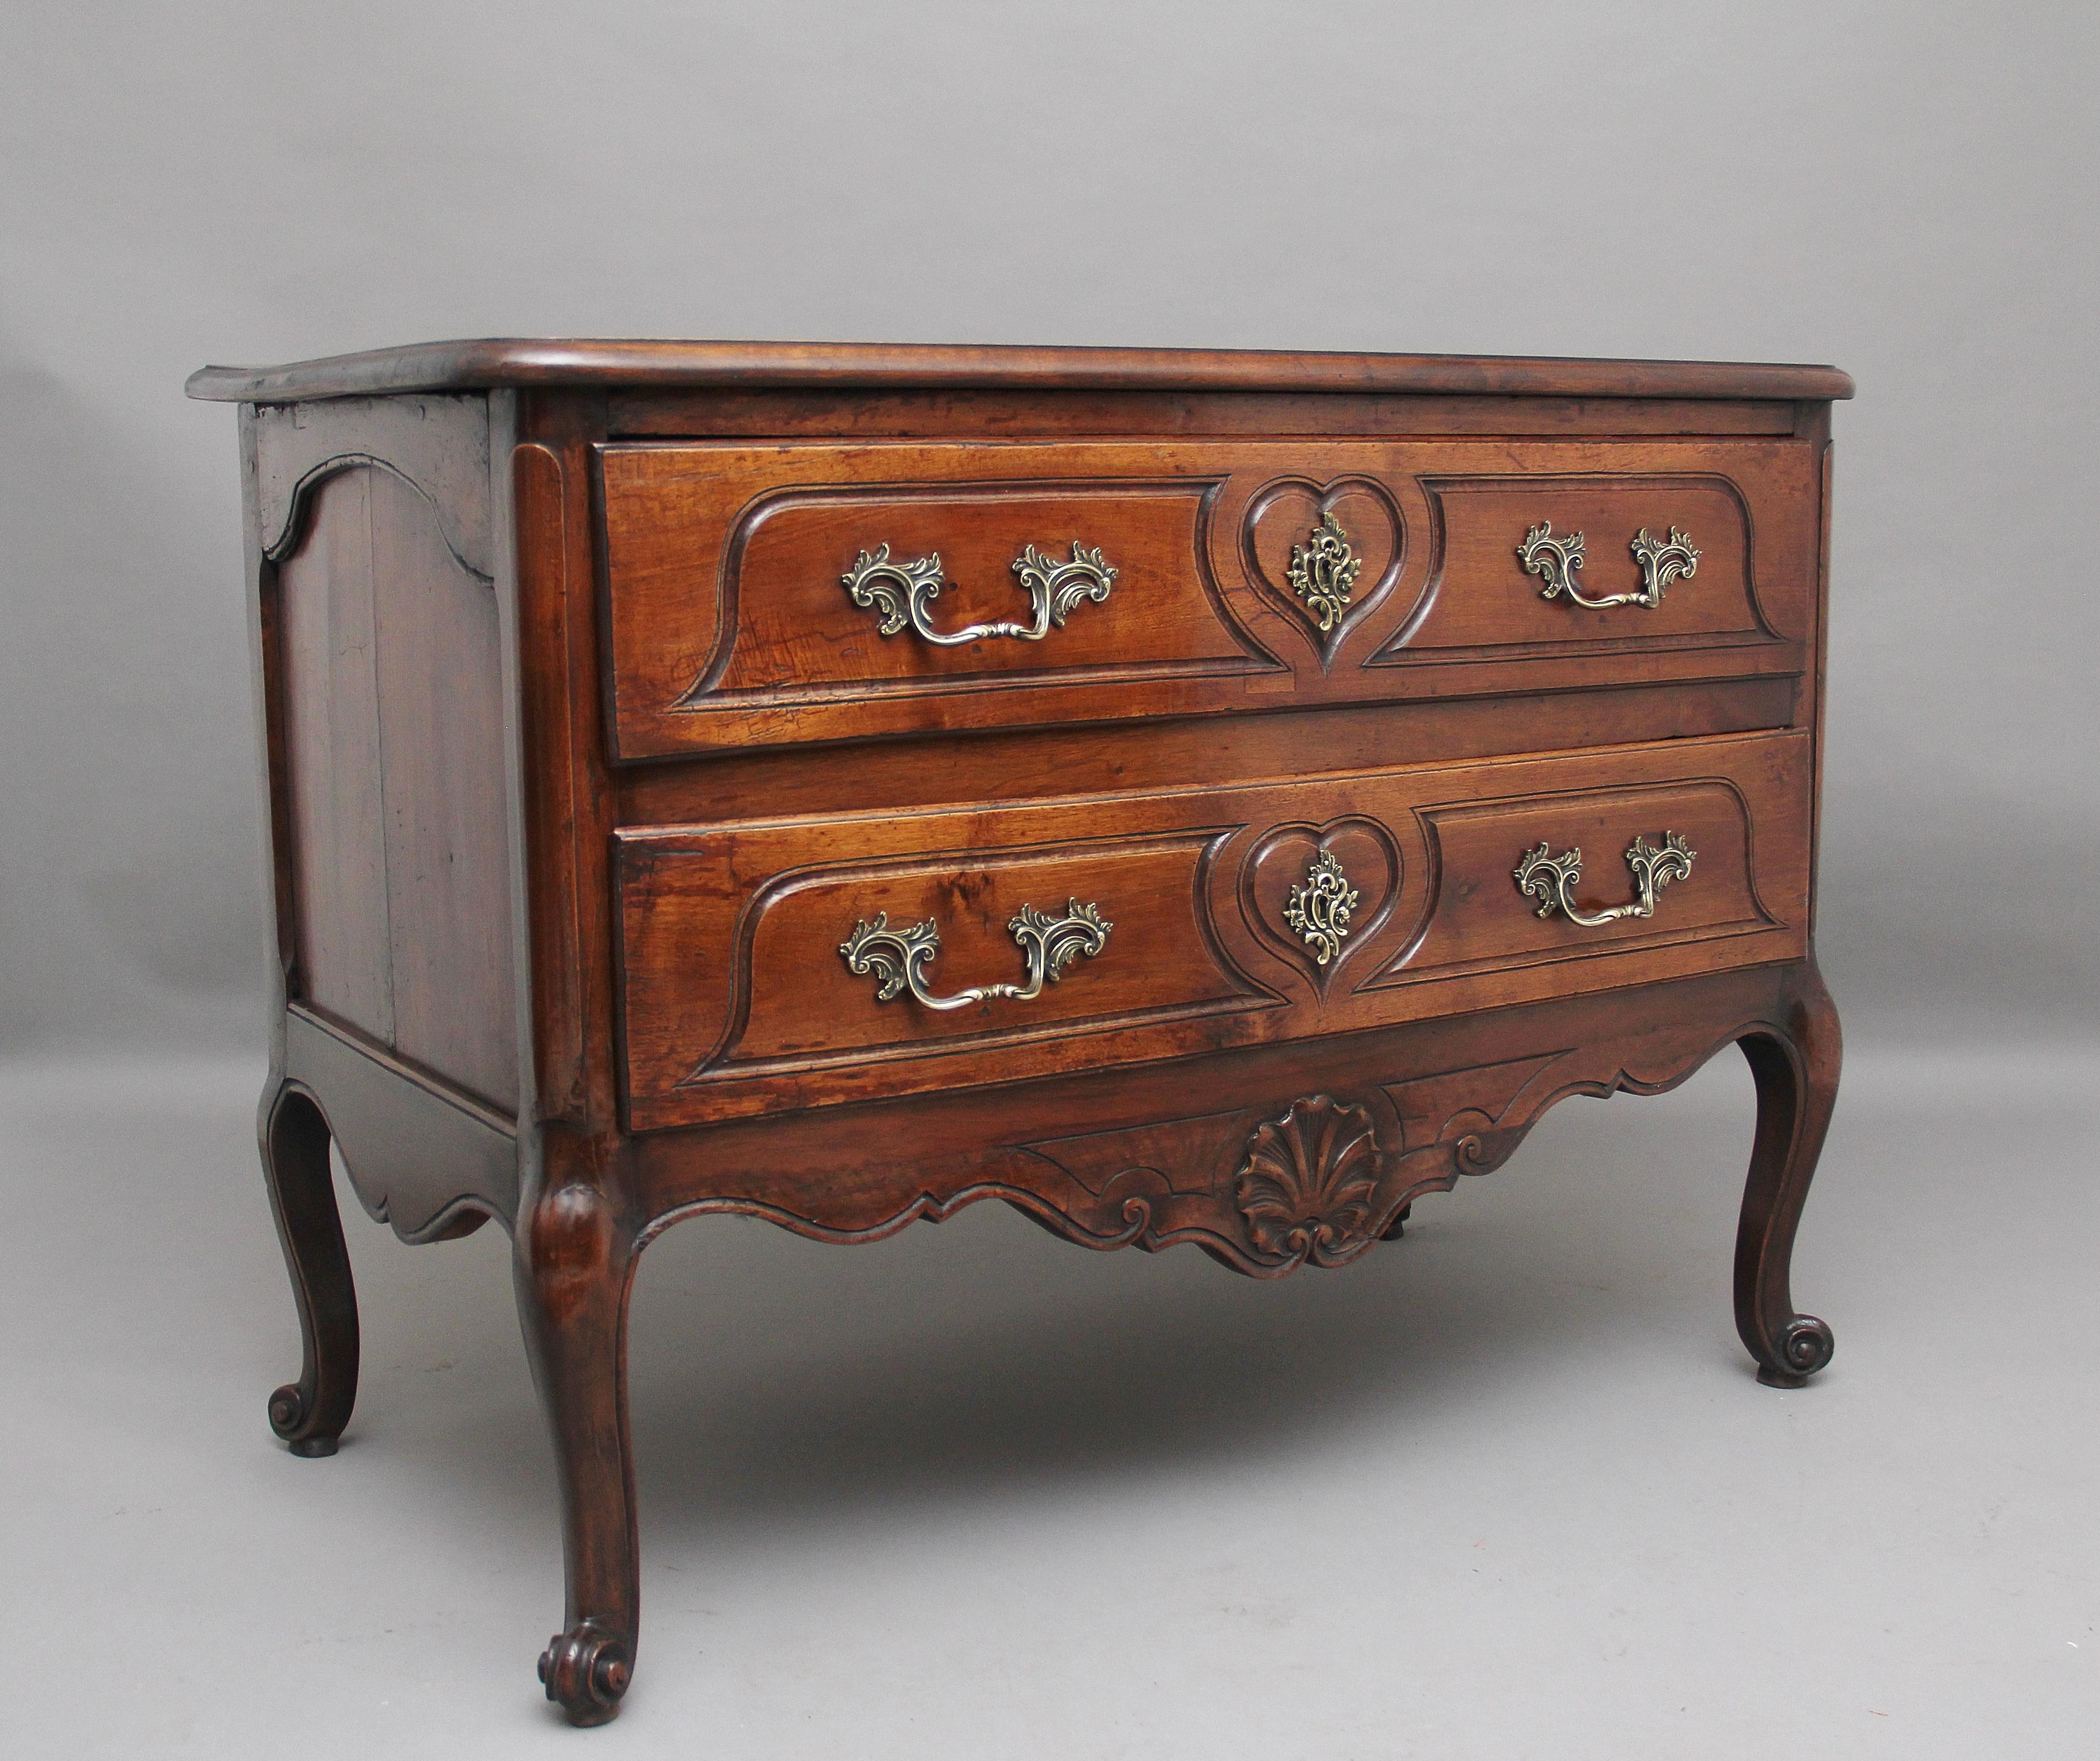 Early 19th century French walnut bow front commode, the shaped moulded edge top above two deep drawers with original brass handles and escutcheons, the drawer fronts having heart shaped incised ornament, shaped conforming frieze below with carved